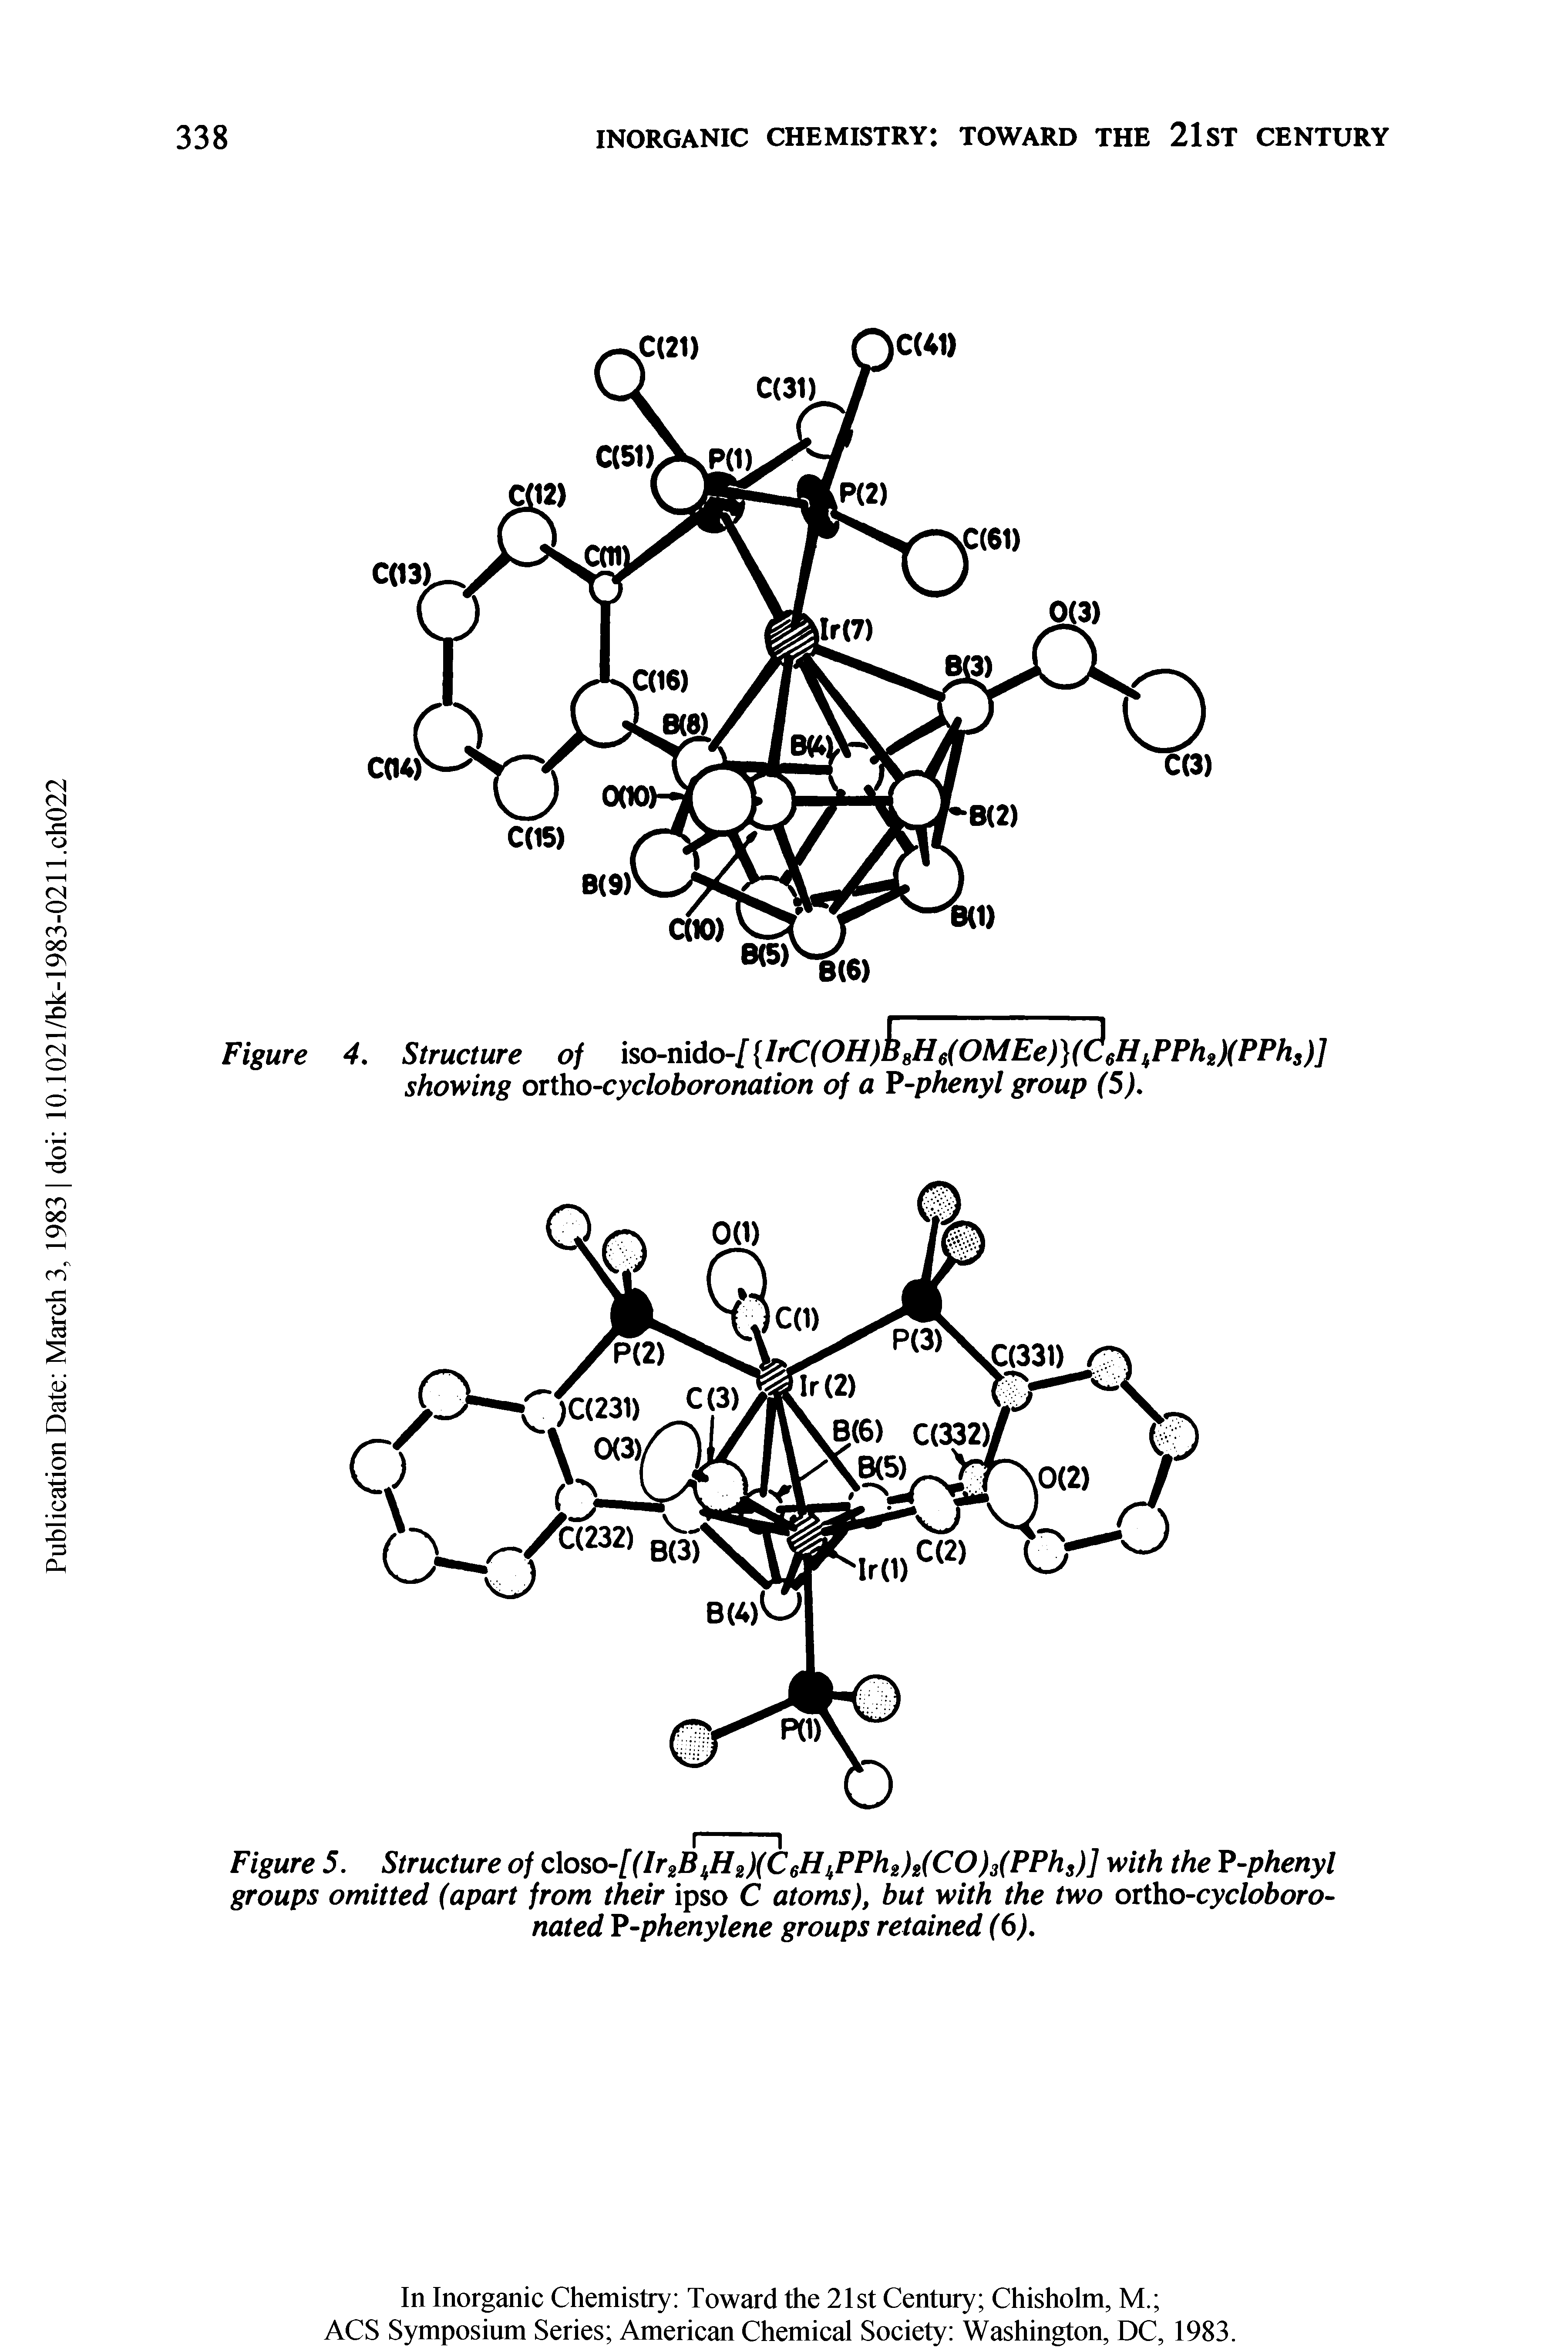 Figure 5. Structure of closo-/ (lr2BkH2)(C6HItPPh2)2(CO)3(PPhs)] with the T -phenyl groups omitted (apart from their ipso C atoms), but with the two ortho-cycloboro-nated P-phenylene groups retained (6),...